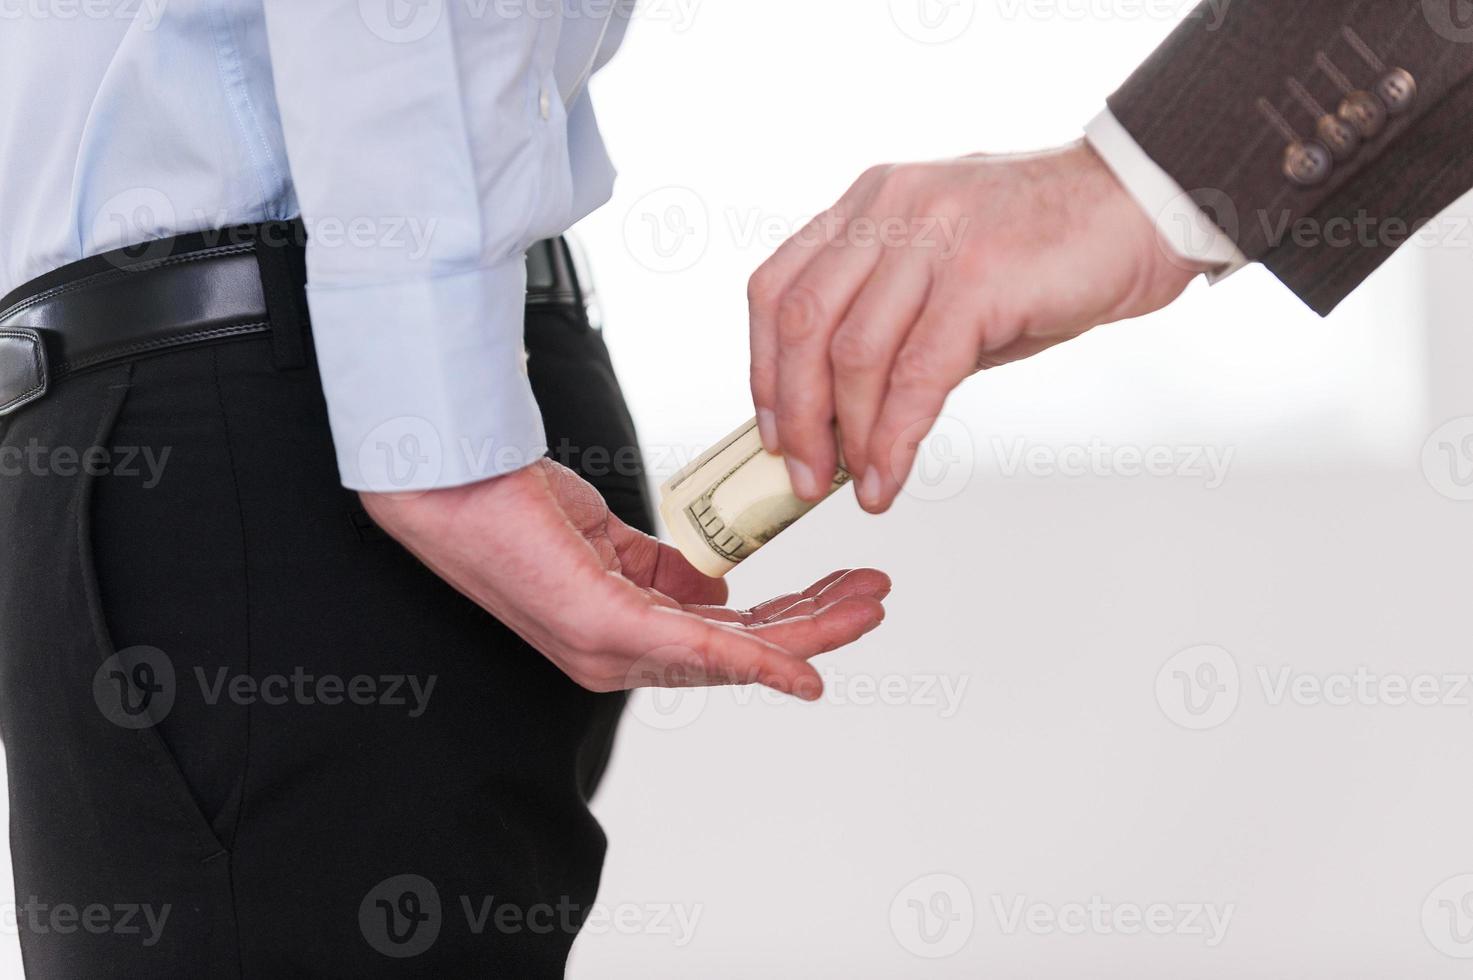 Giving a bribe. Close-up of businessman giving money to another man in formalwear photo